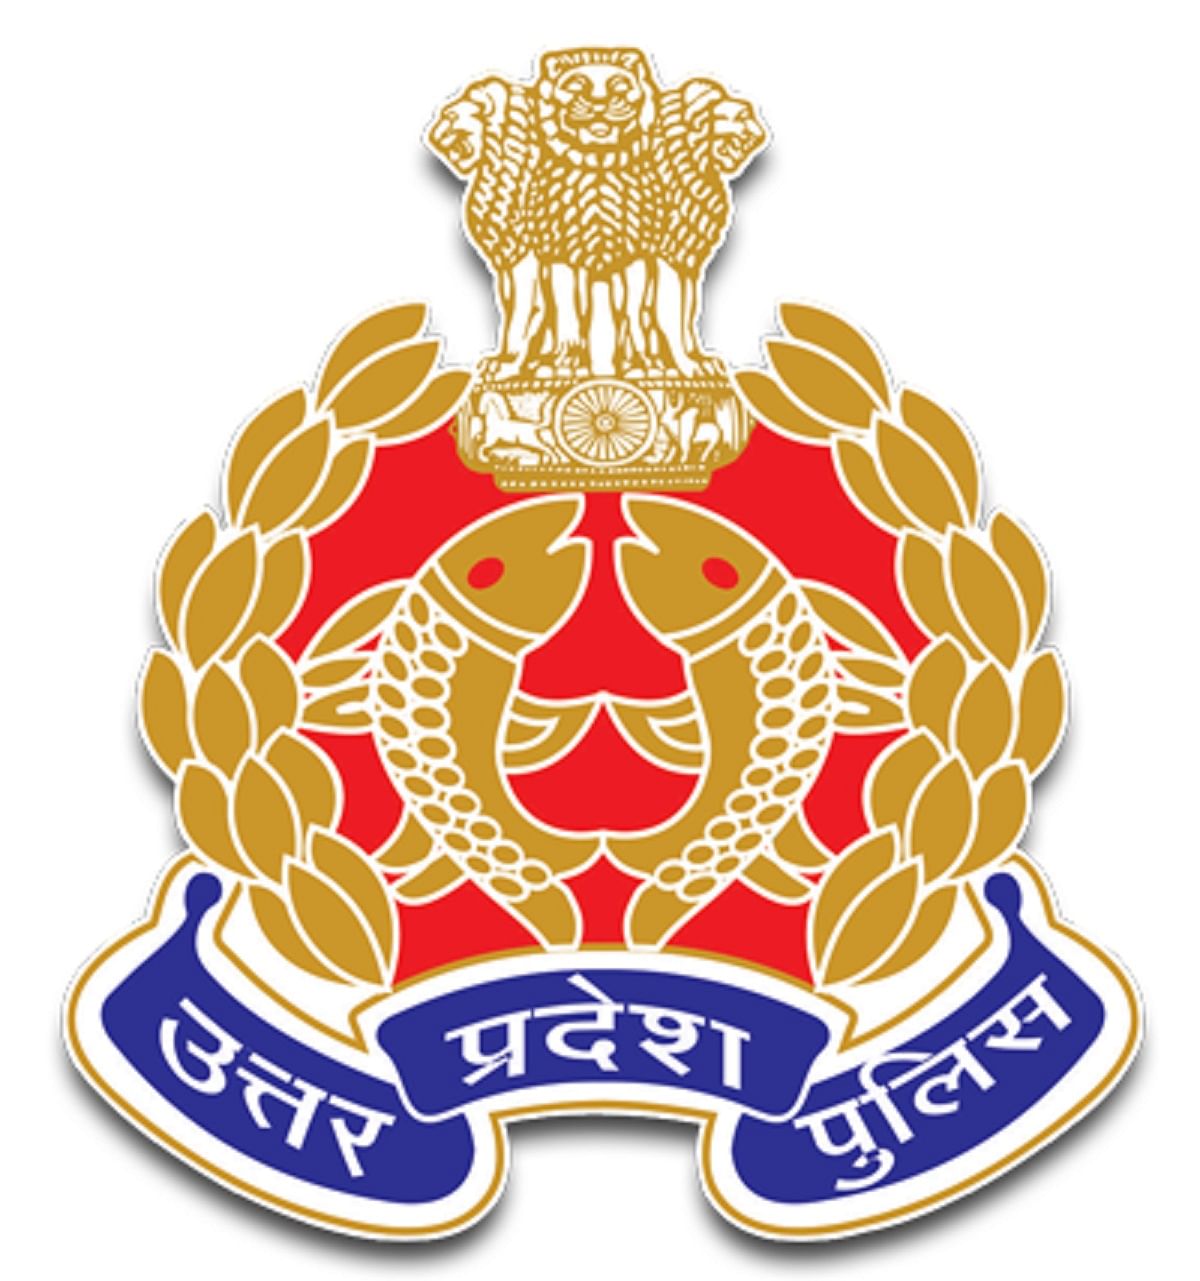 UP Police Constable PET Admit Card 2019 Released, Check Direct Link Here